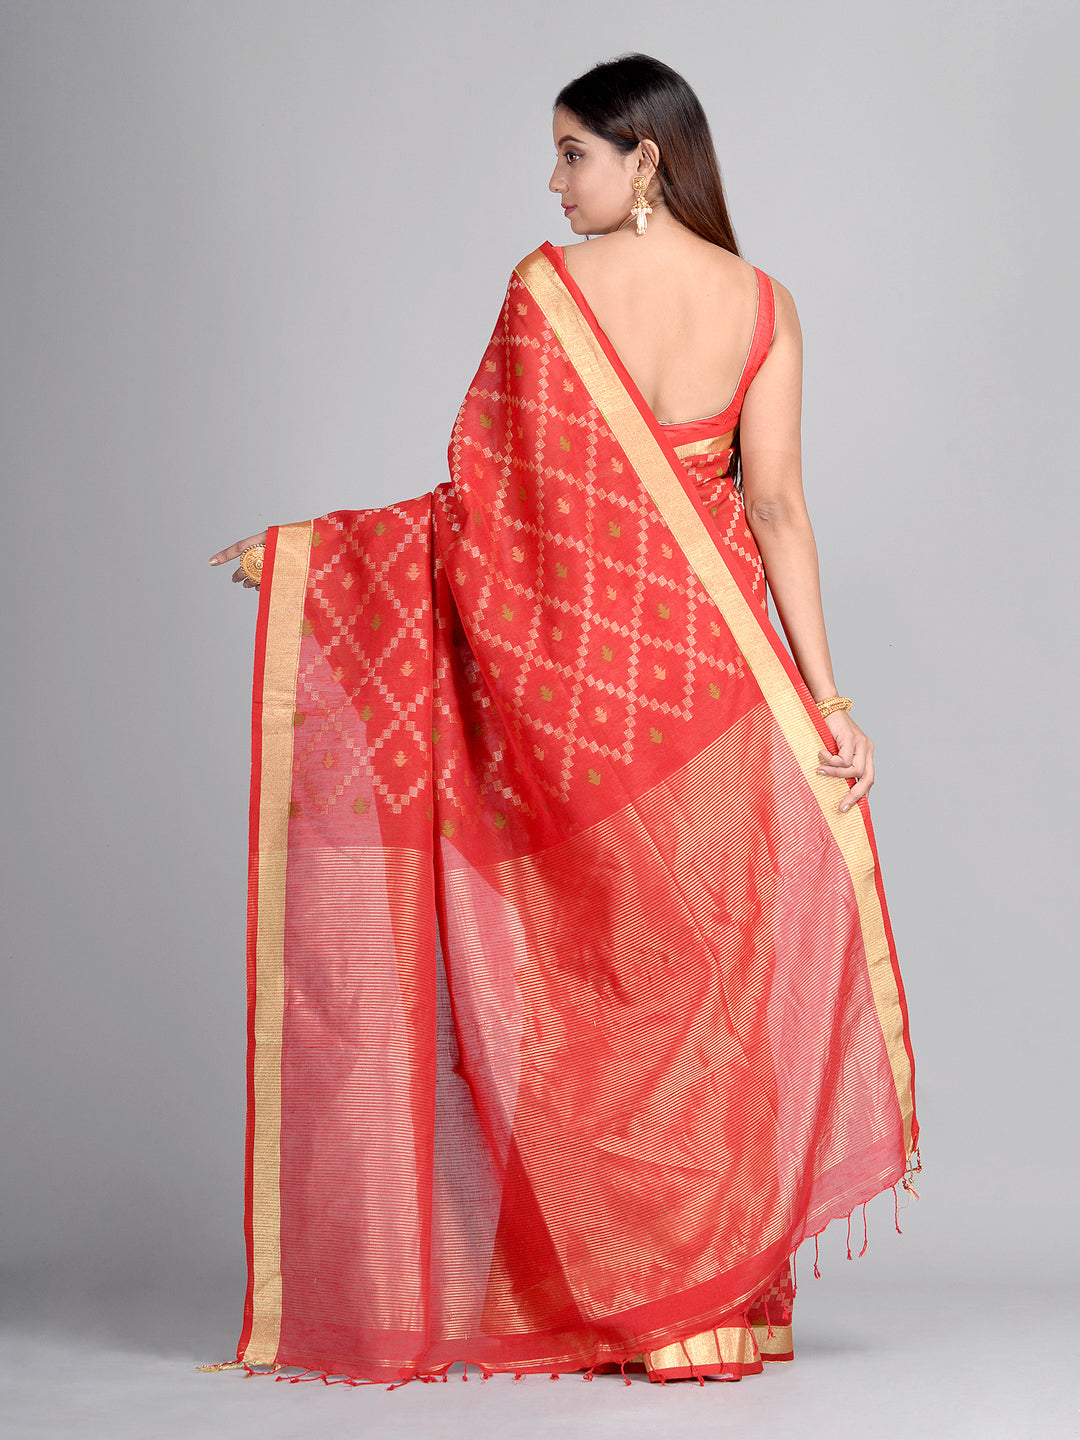 Women's Red Hand Woven Cotton Linen Designer Saree With Unstitched Blouse-Sajasajo